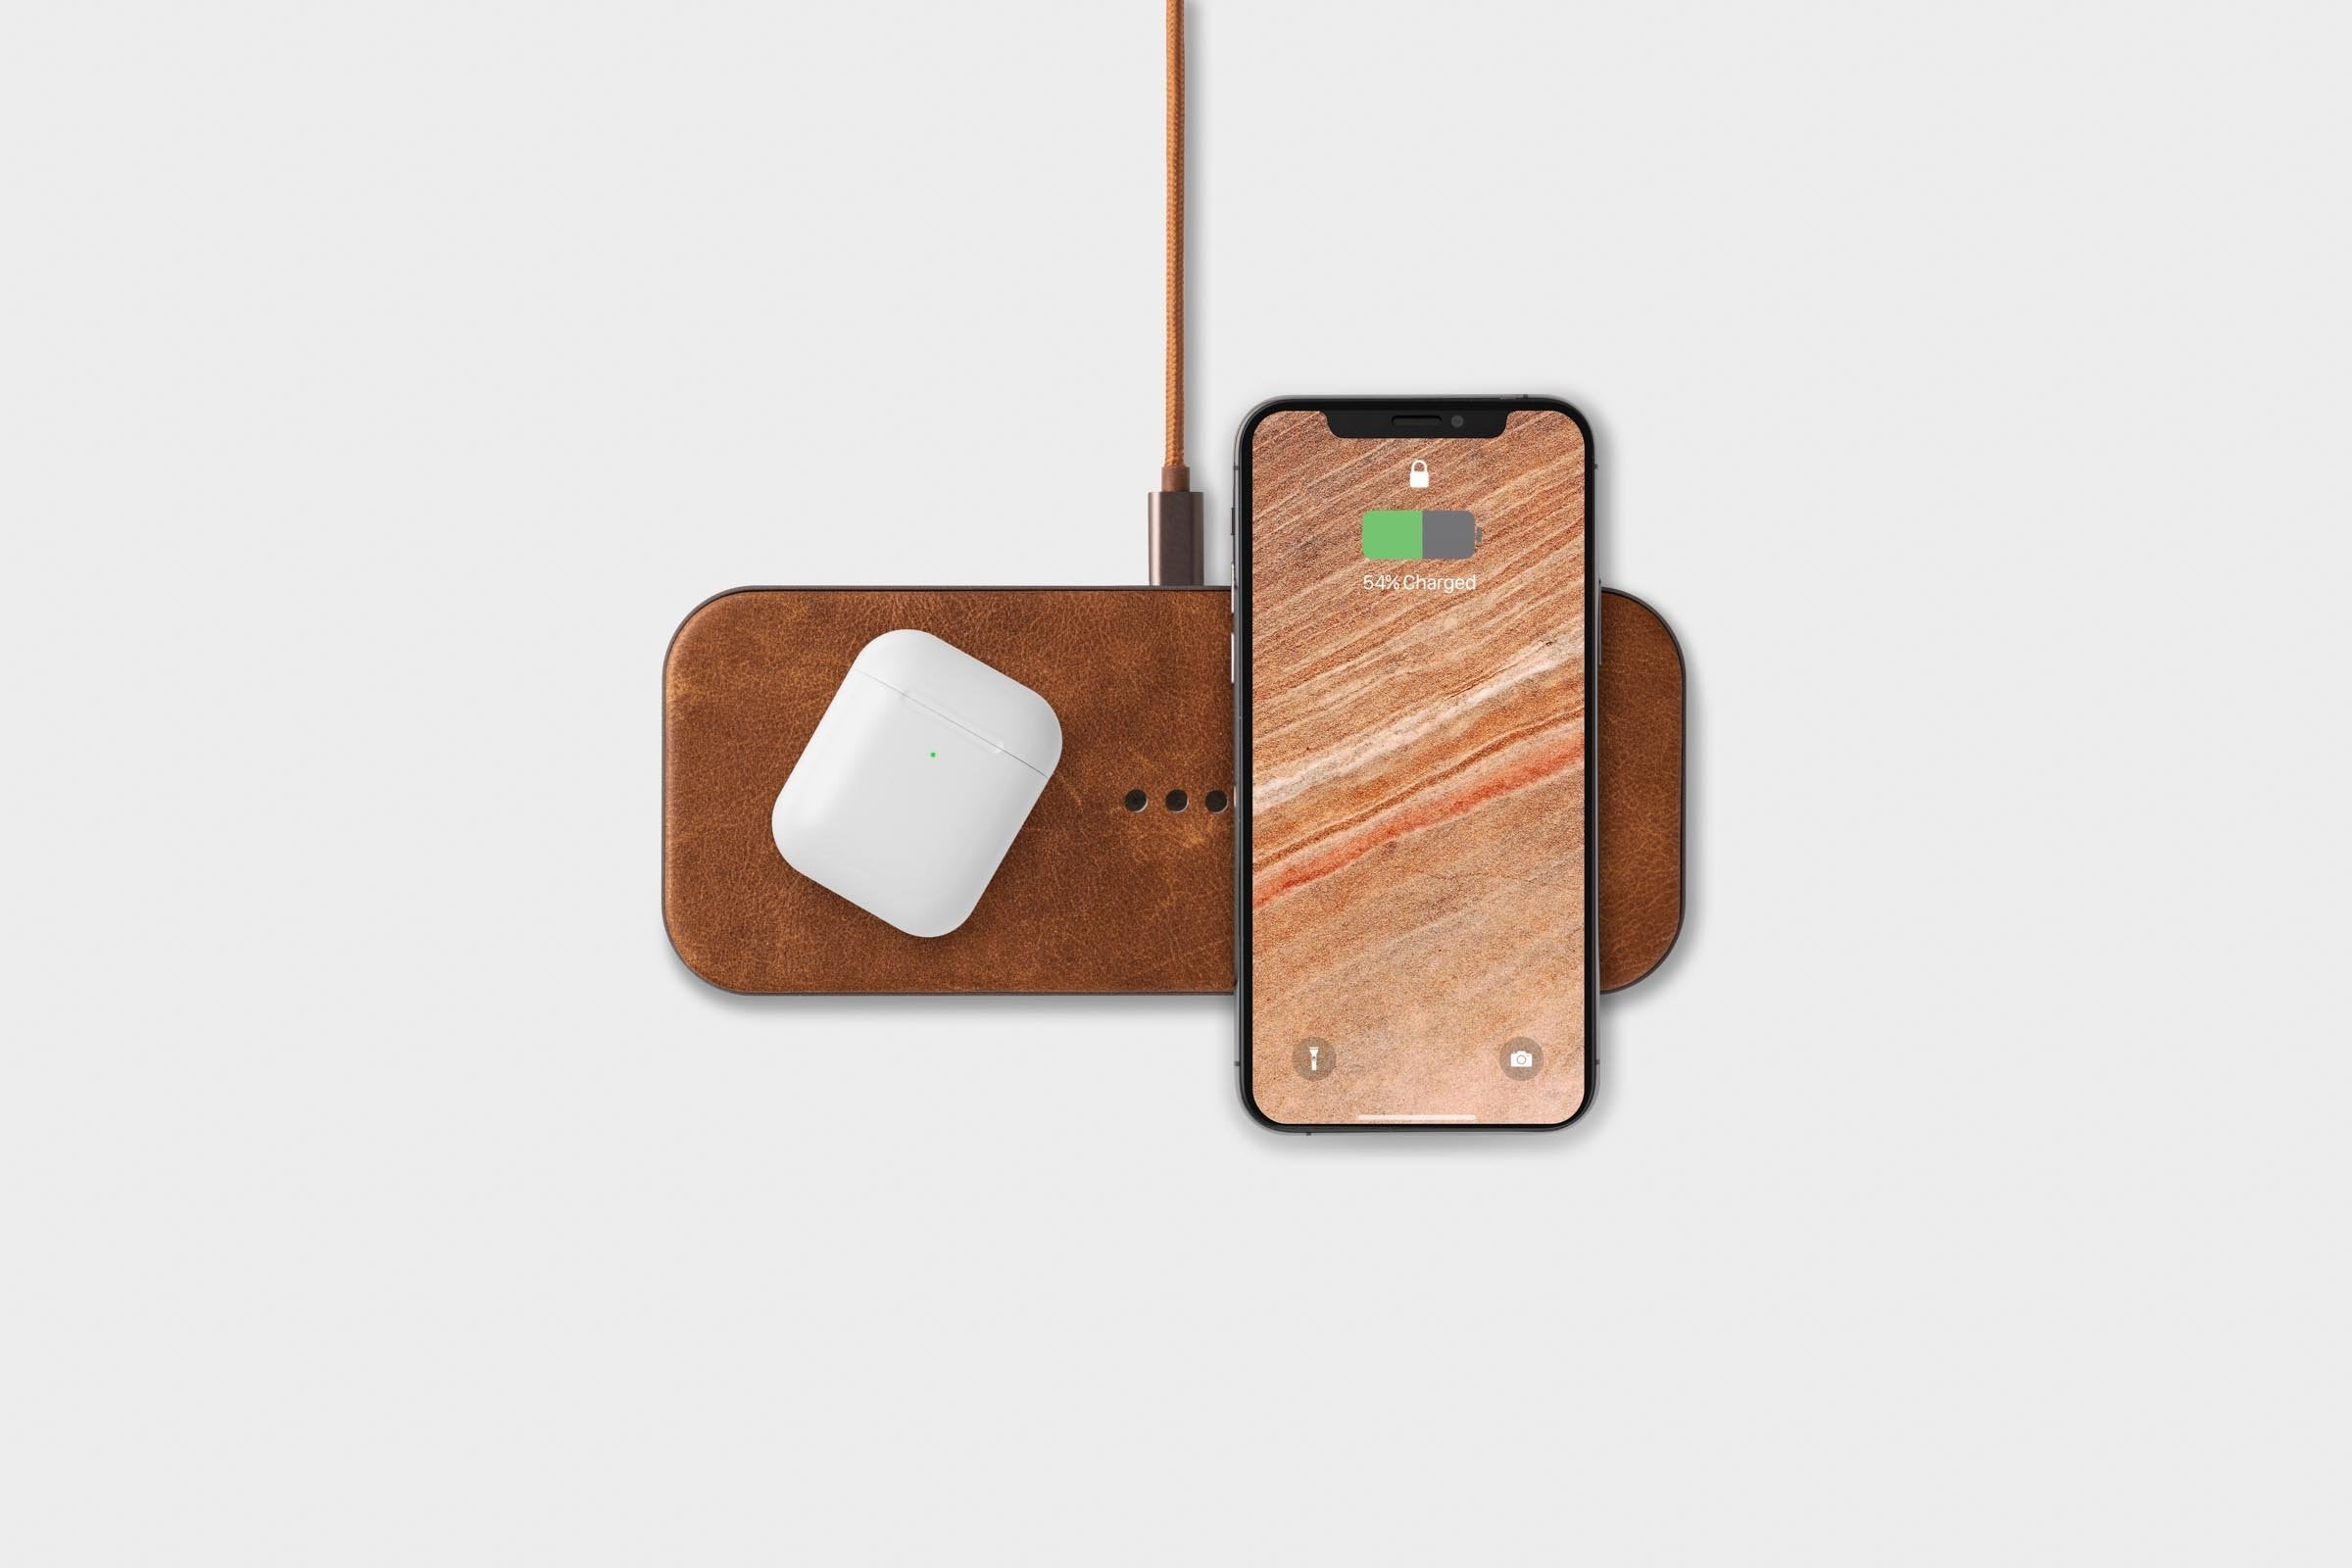 CATCH:2 DUAL WIRELESS LEATHER CHARGER - SADDLE